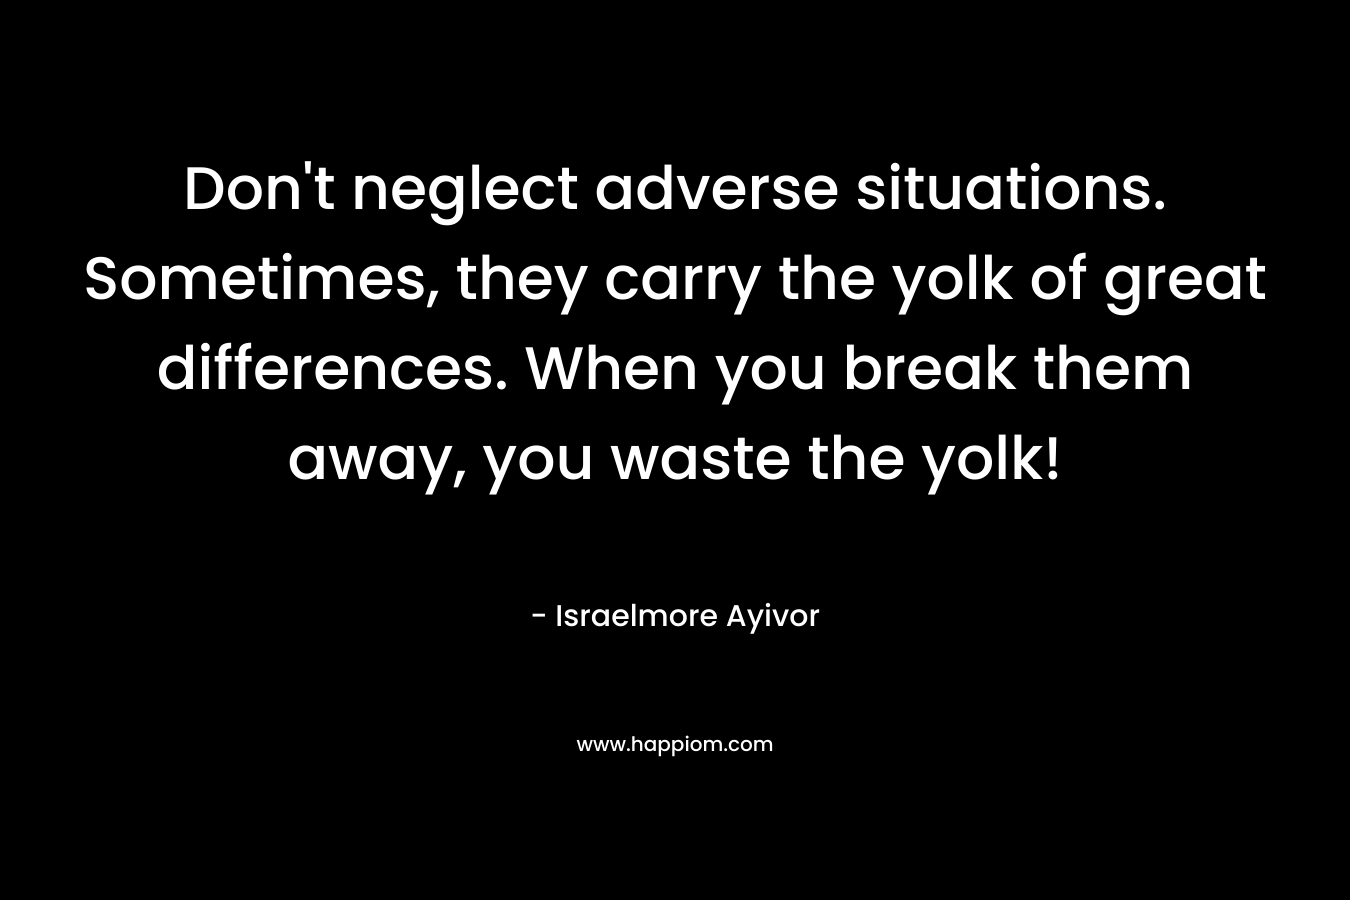 Don’t neglect adverse situations. Sometimes, they carry the yolk of great differences. When you break them away, you waste the yolk! – Israelmore Ayivor